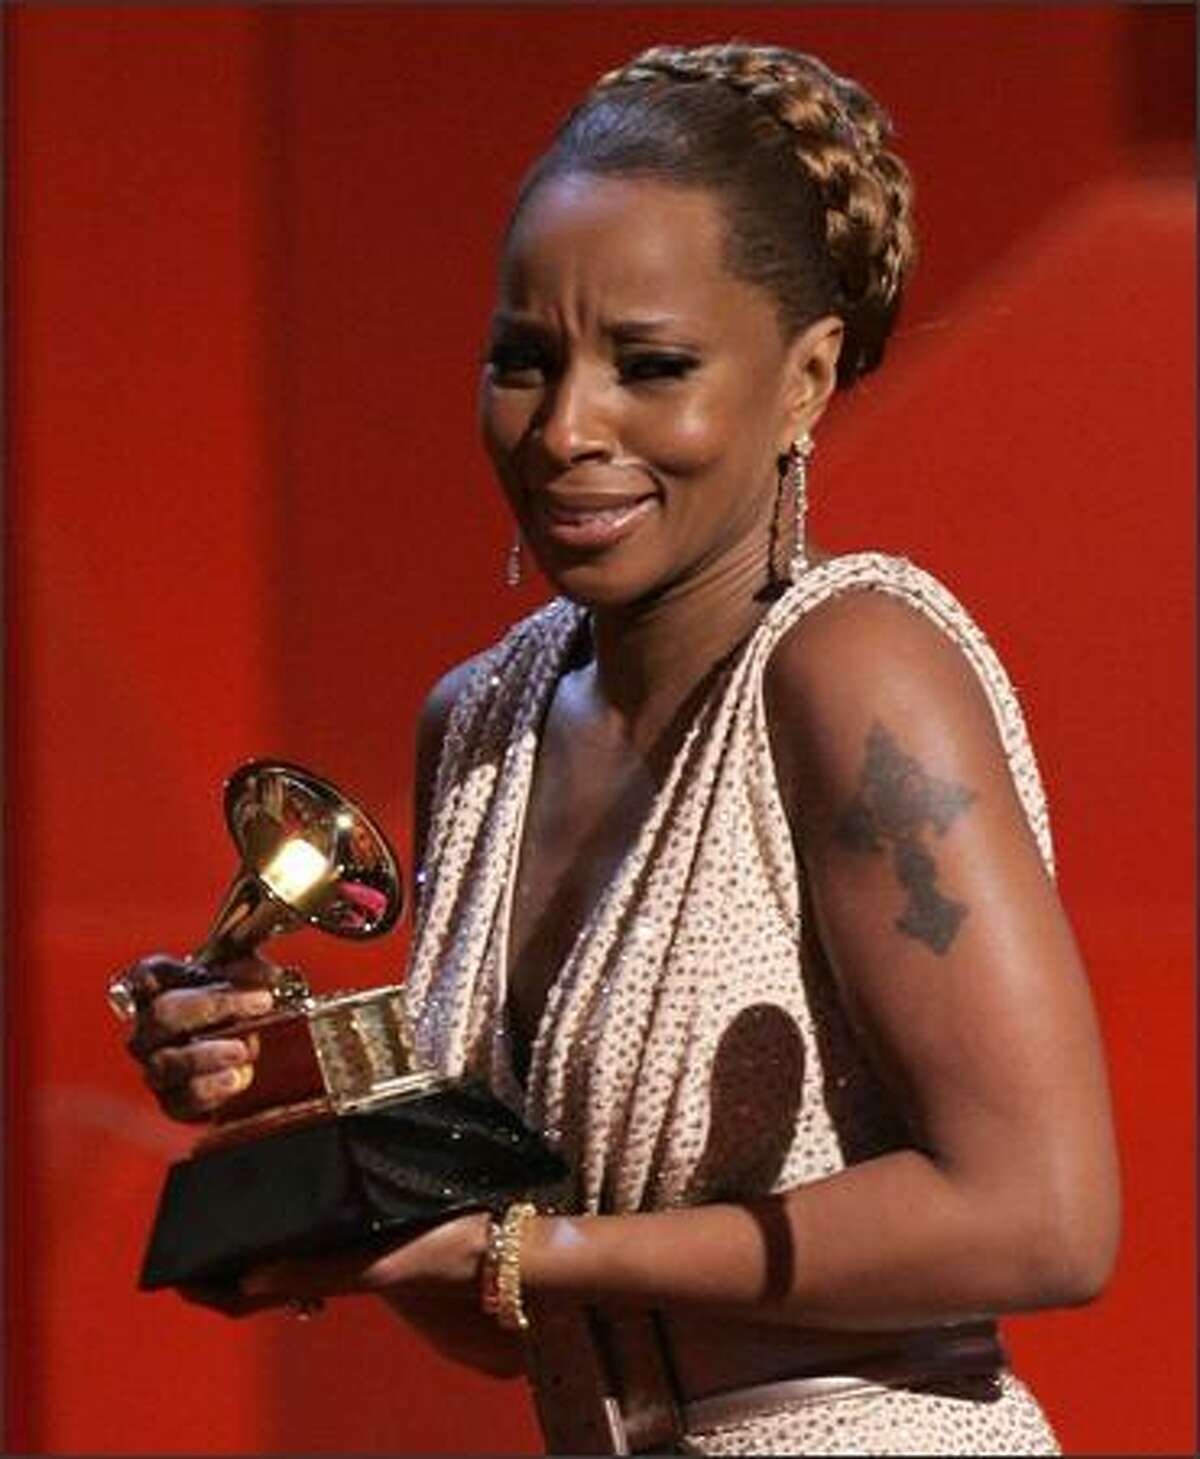 A tearful Mary J. Blige accepts the award for best female R&B vocal performance for "Be Without You."